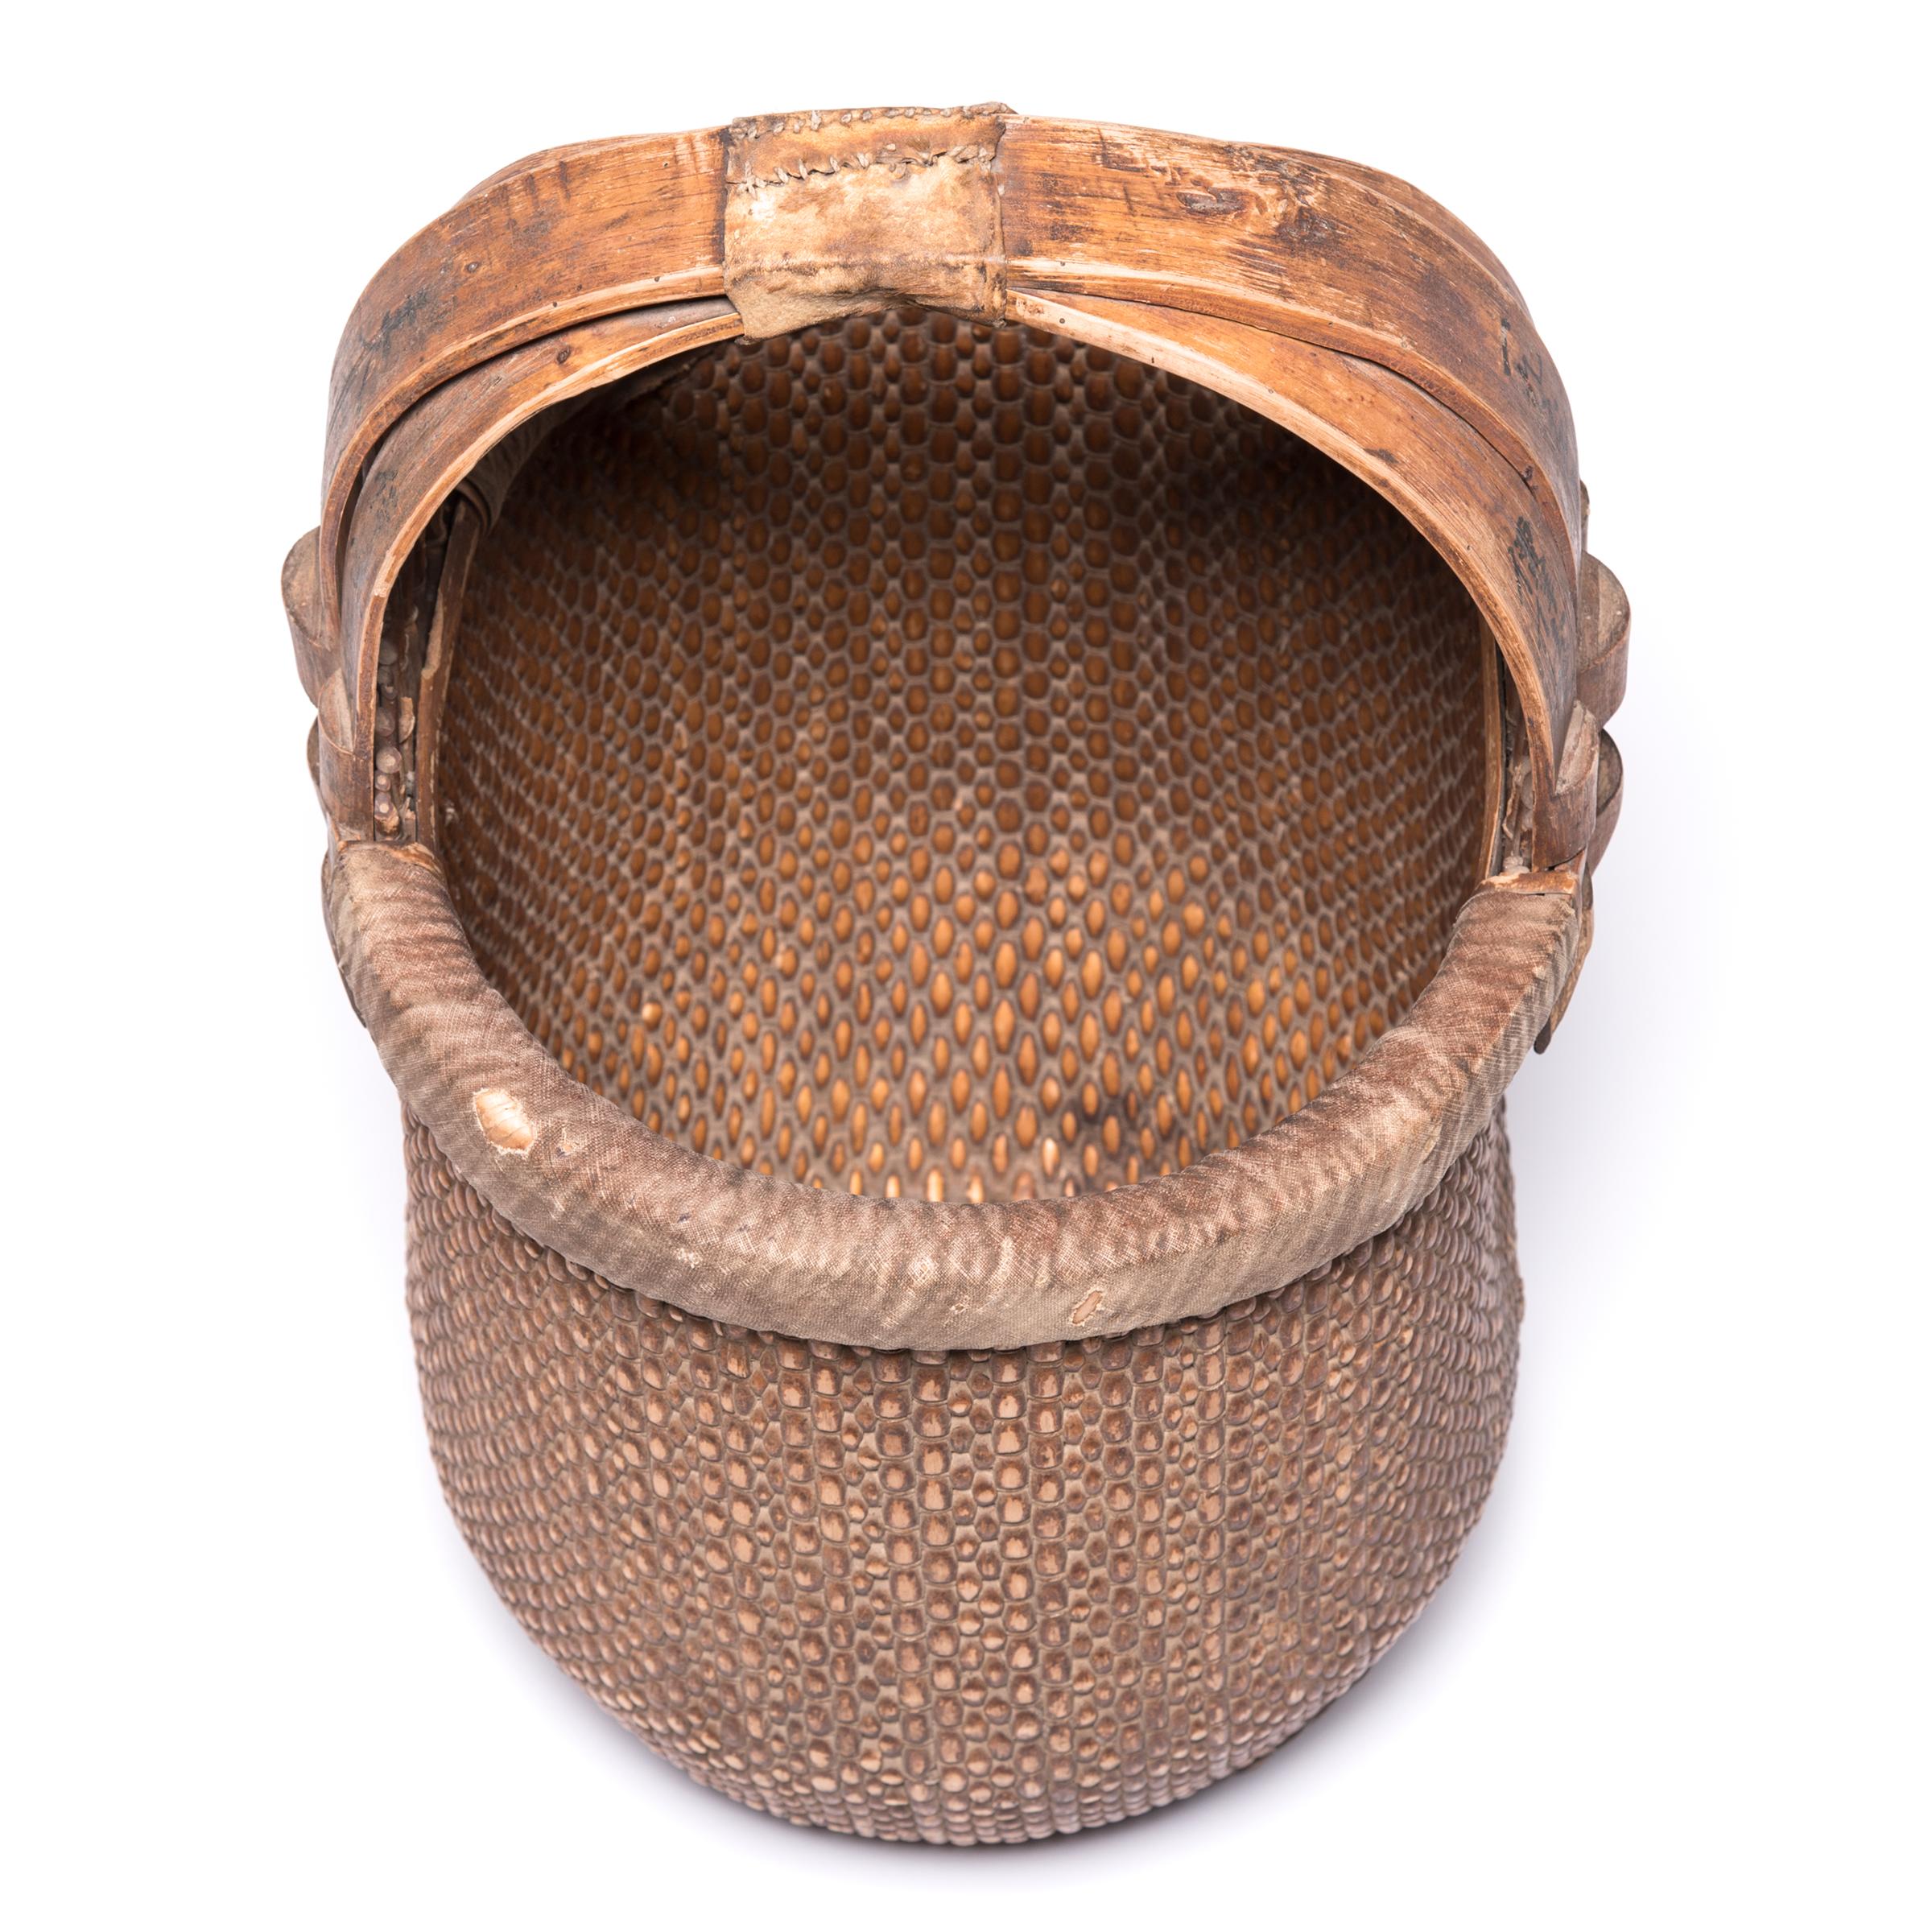 Hand-Woven Chinese Bent Handle Fisherman's Basket, c. 1850 For Sale